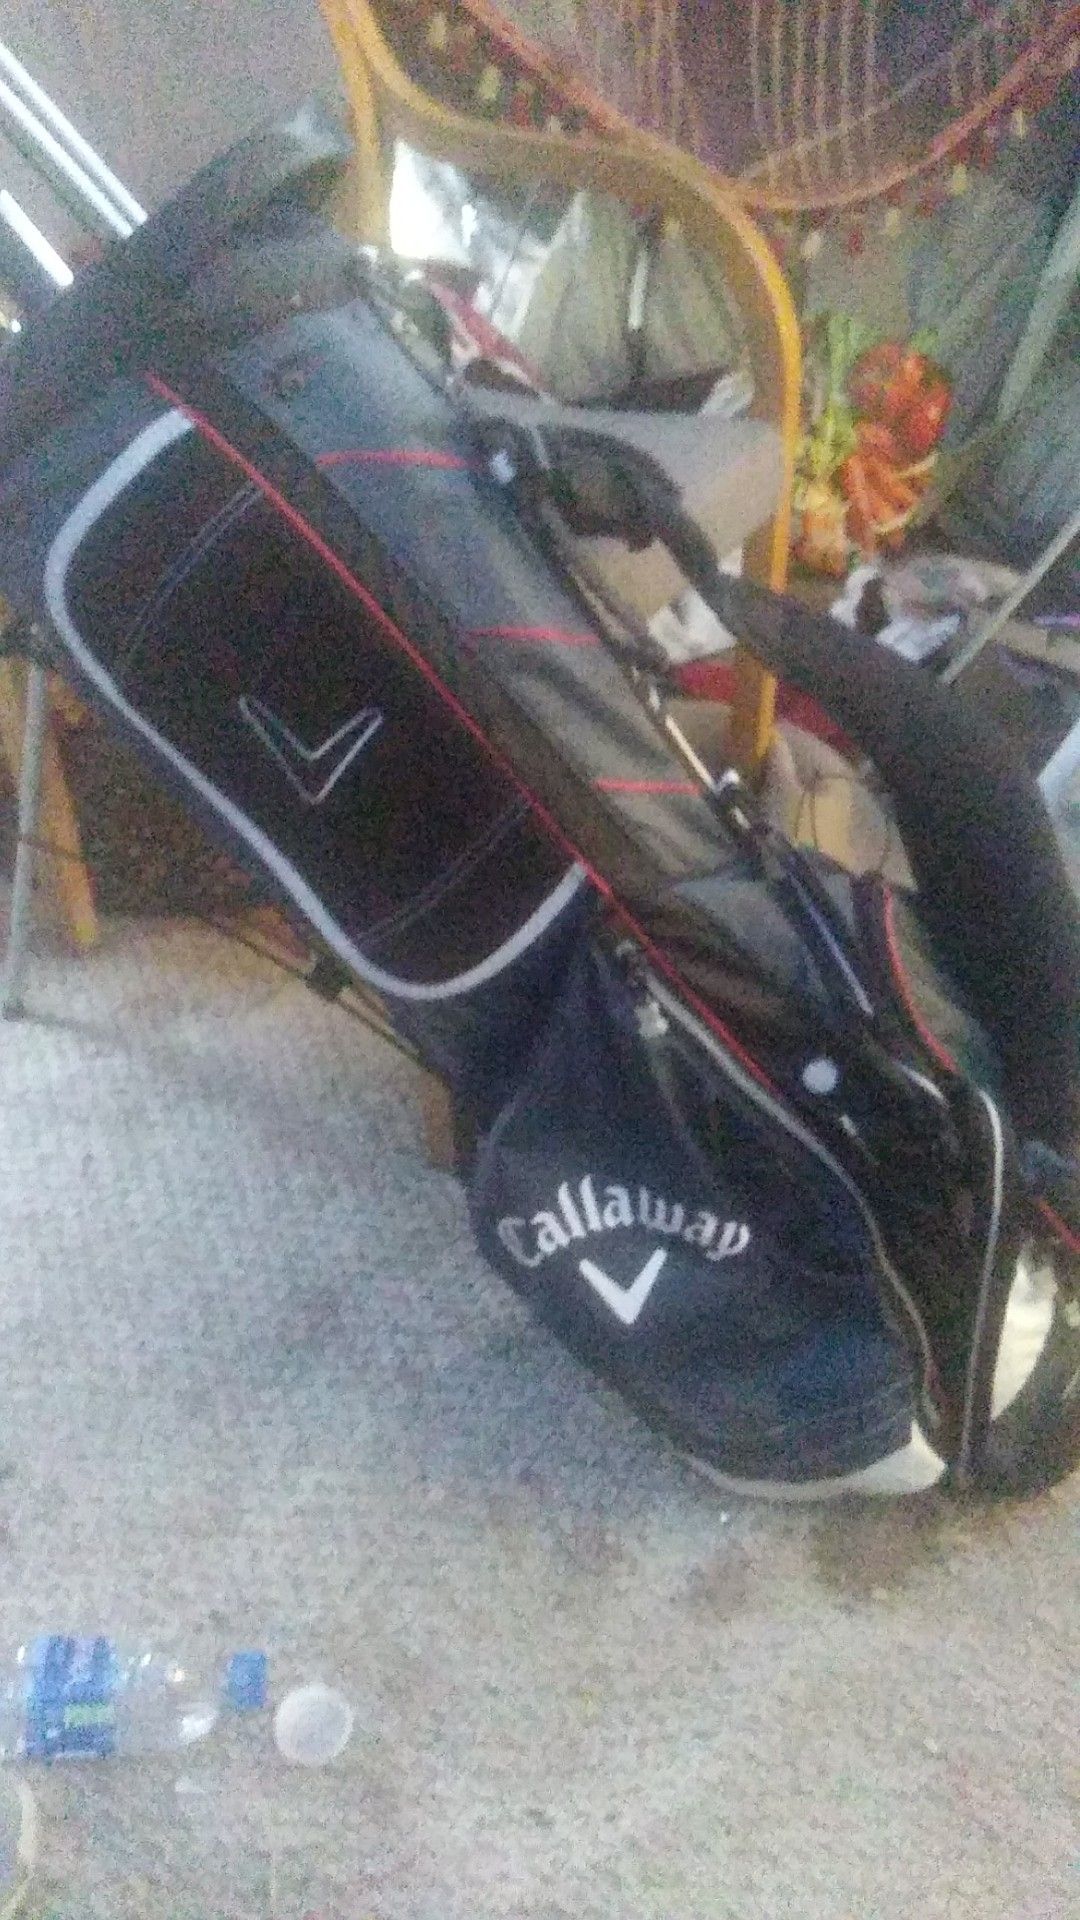 Callaway golf bag with full set of clubs